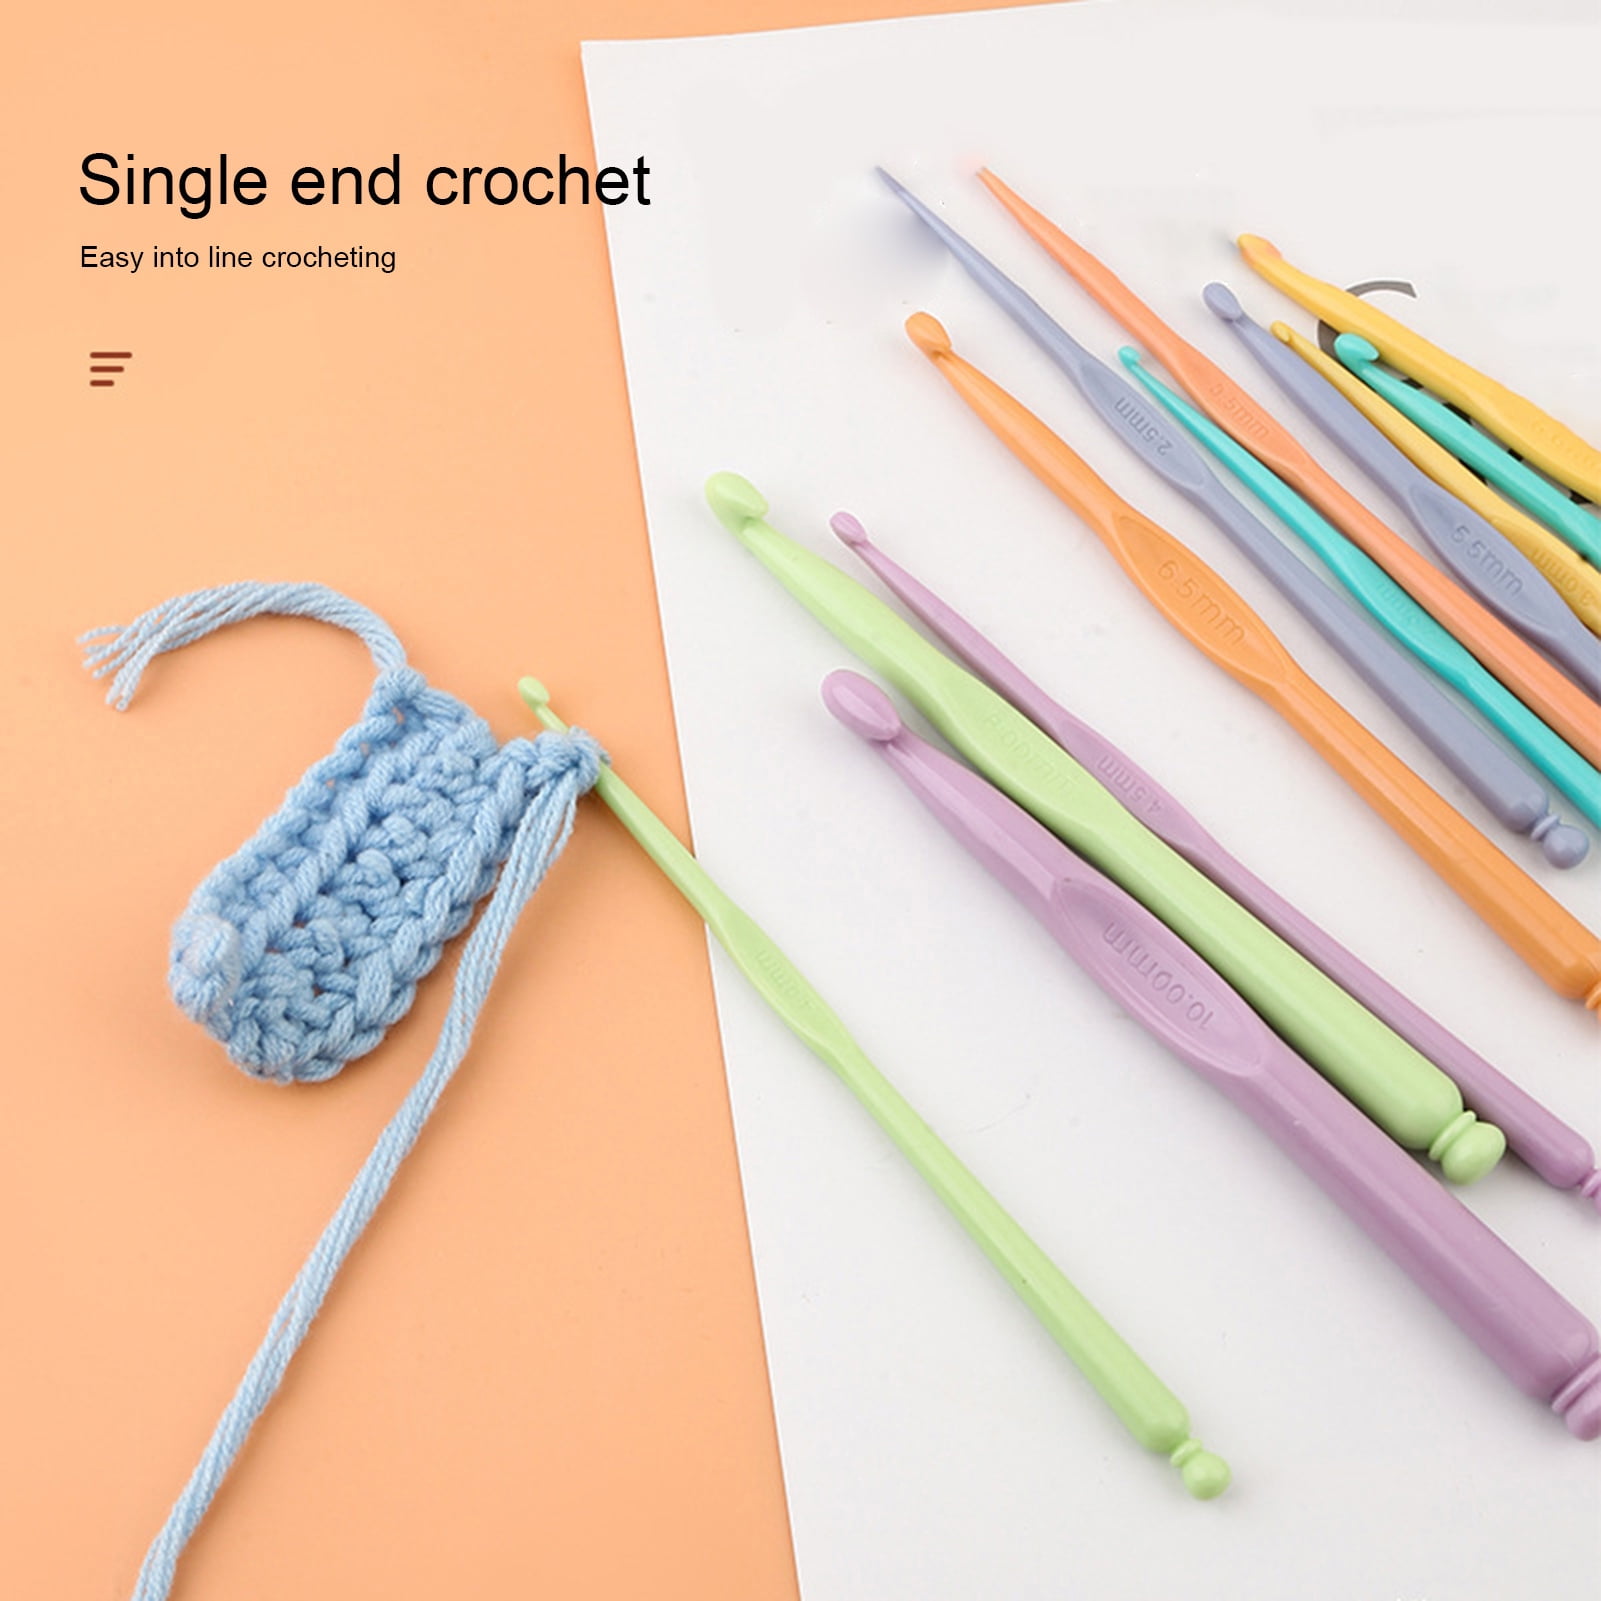 Klixer Electric Crochet Needle Review and Tutorial 